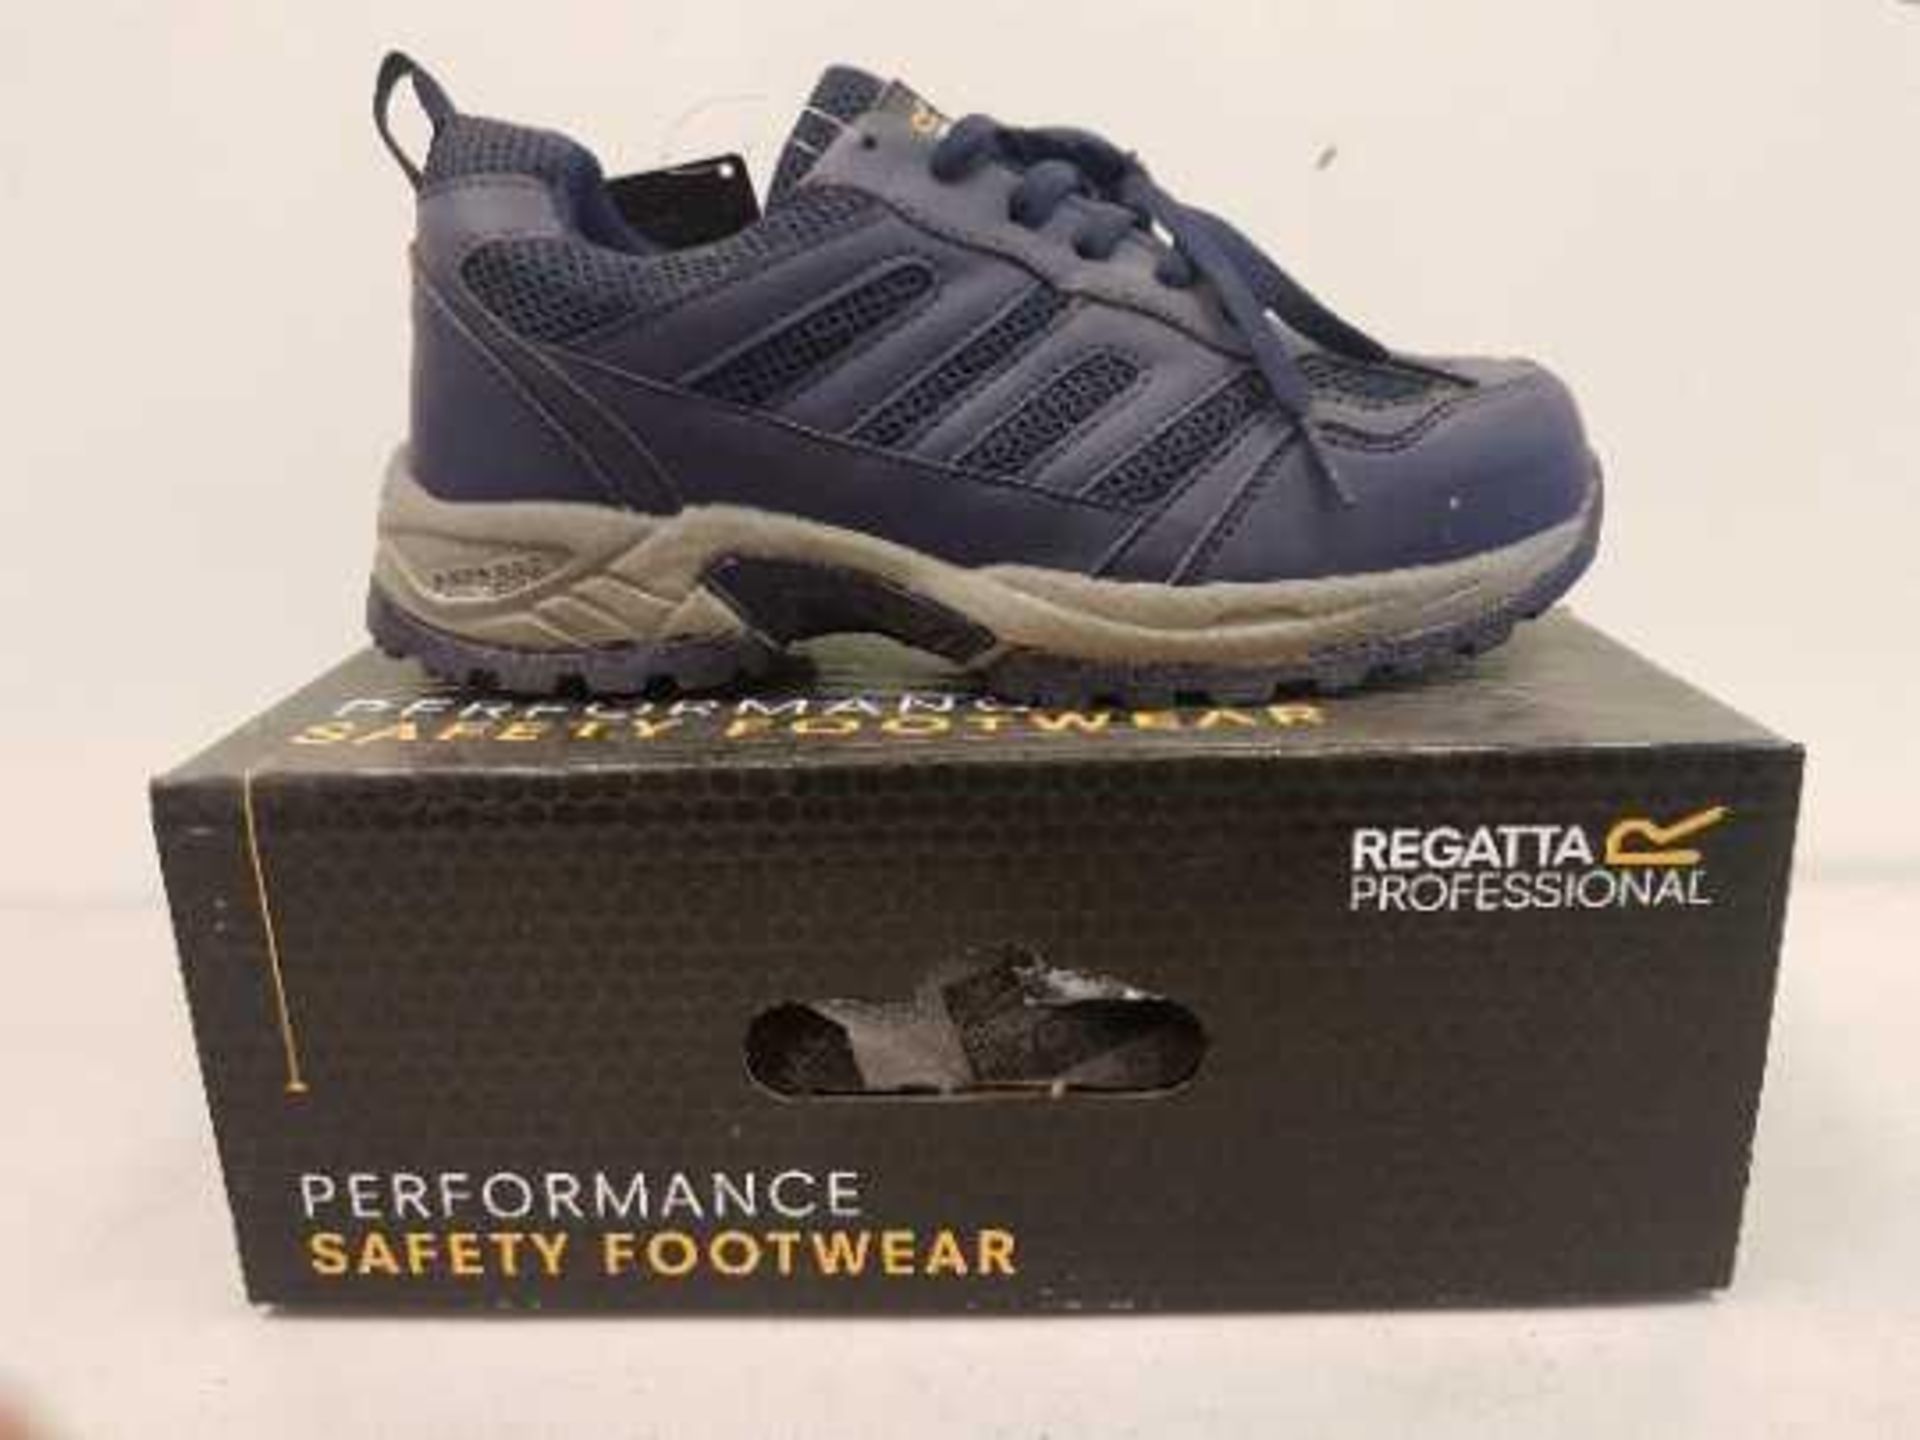 REGATTA STEPLITE SB SAFETY TRANER. SIZE 9 (EUR 43) NEW AND BOXED Material: PU/mesh upper. Wide